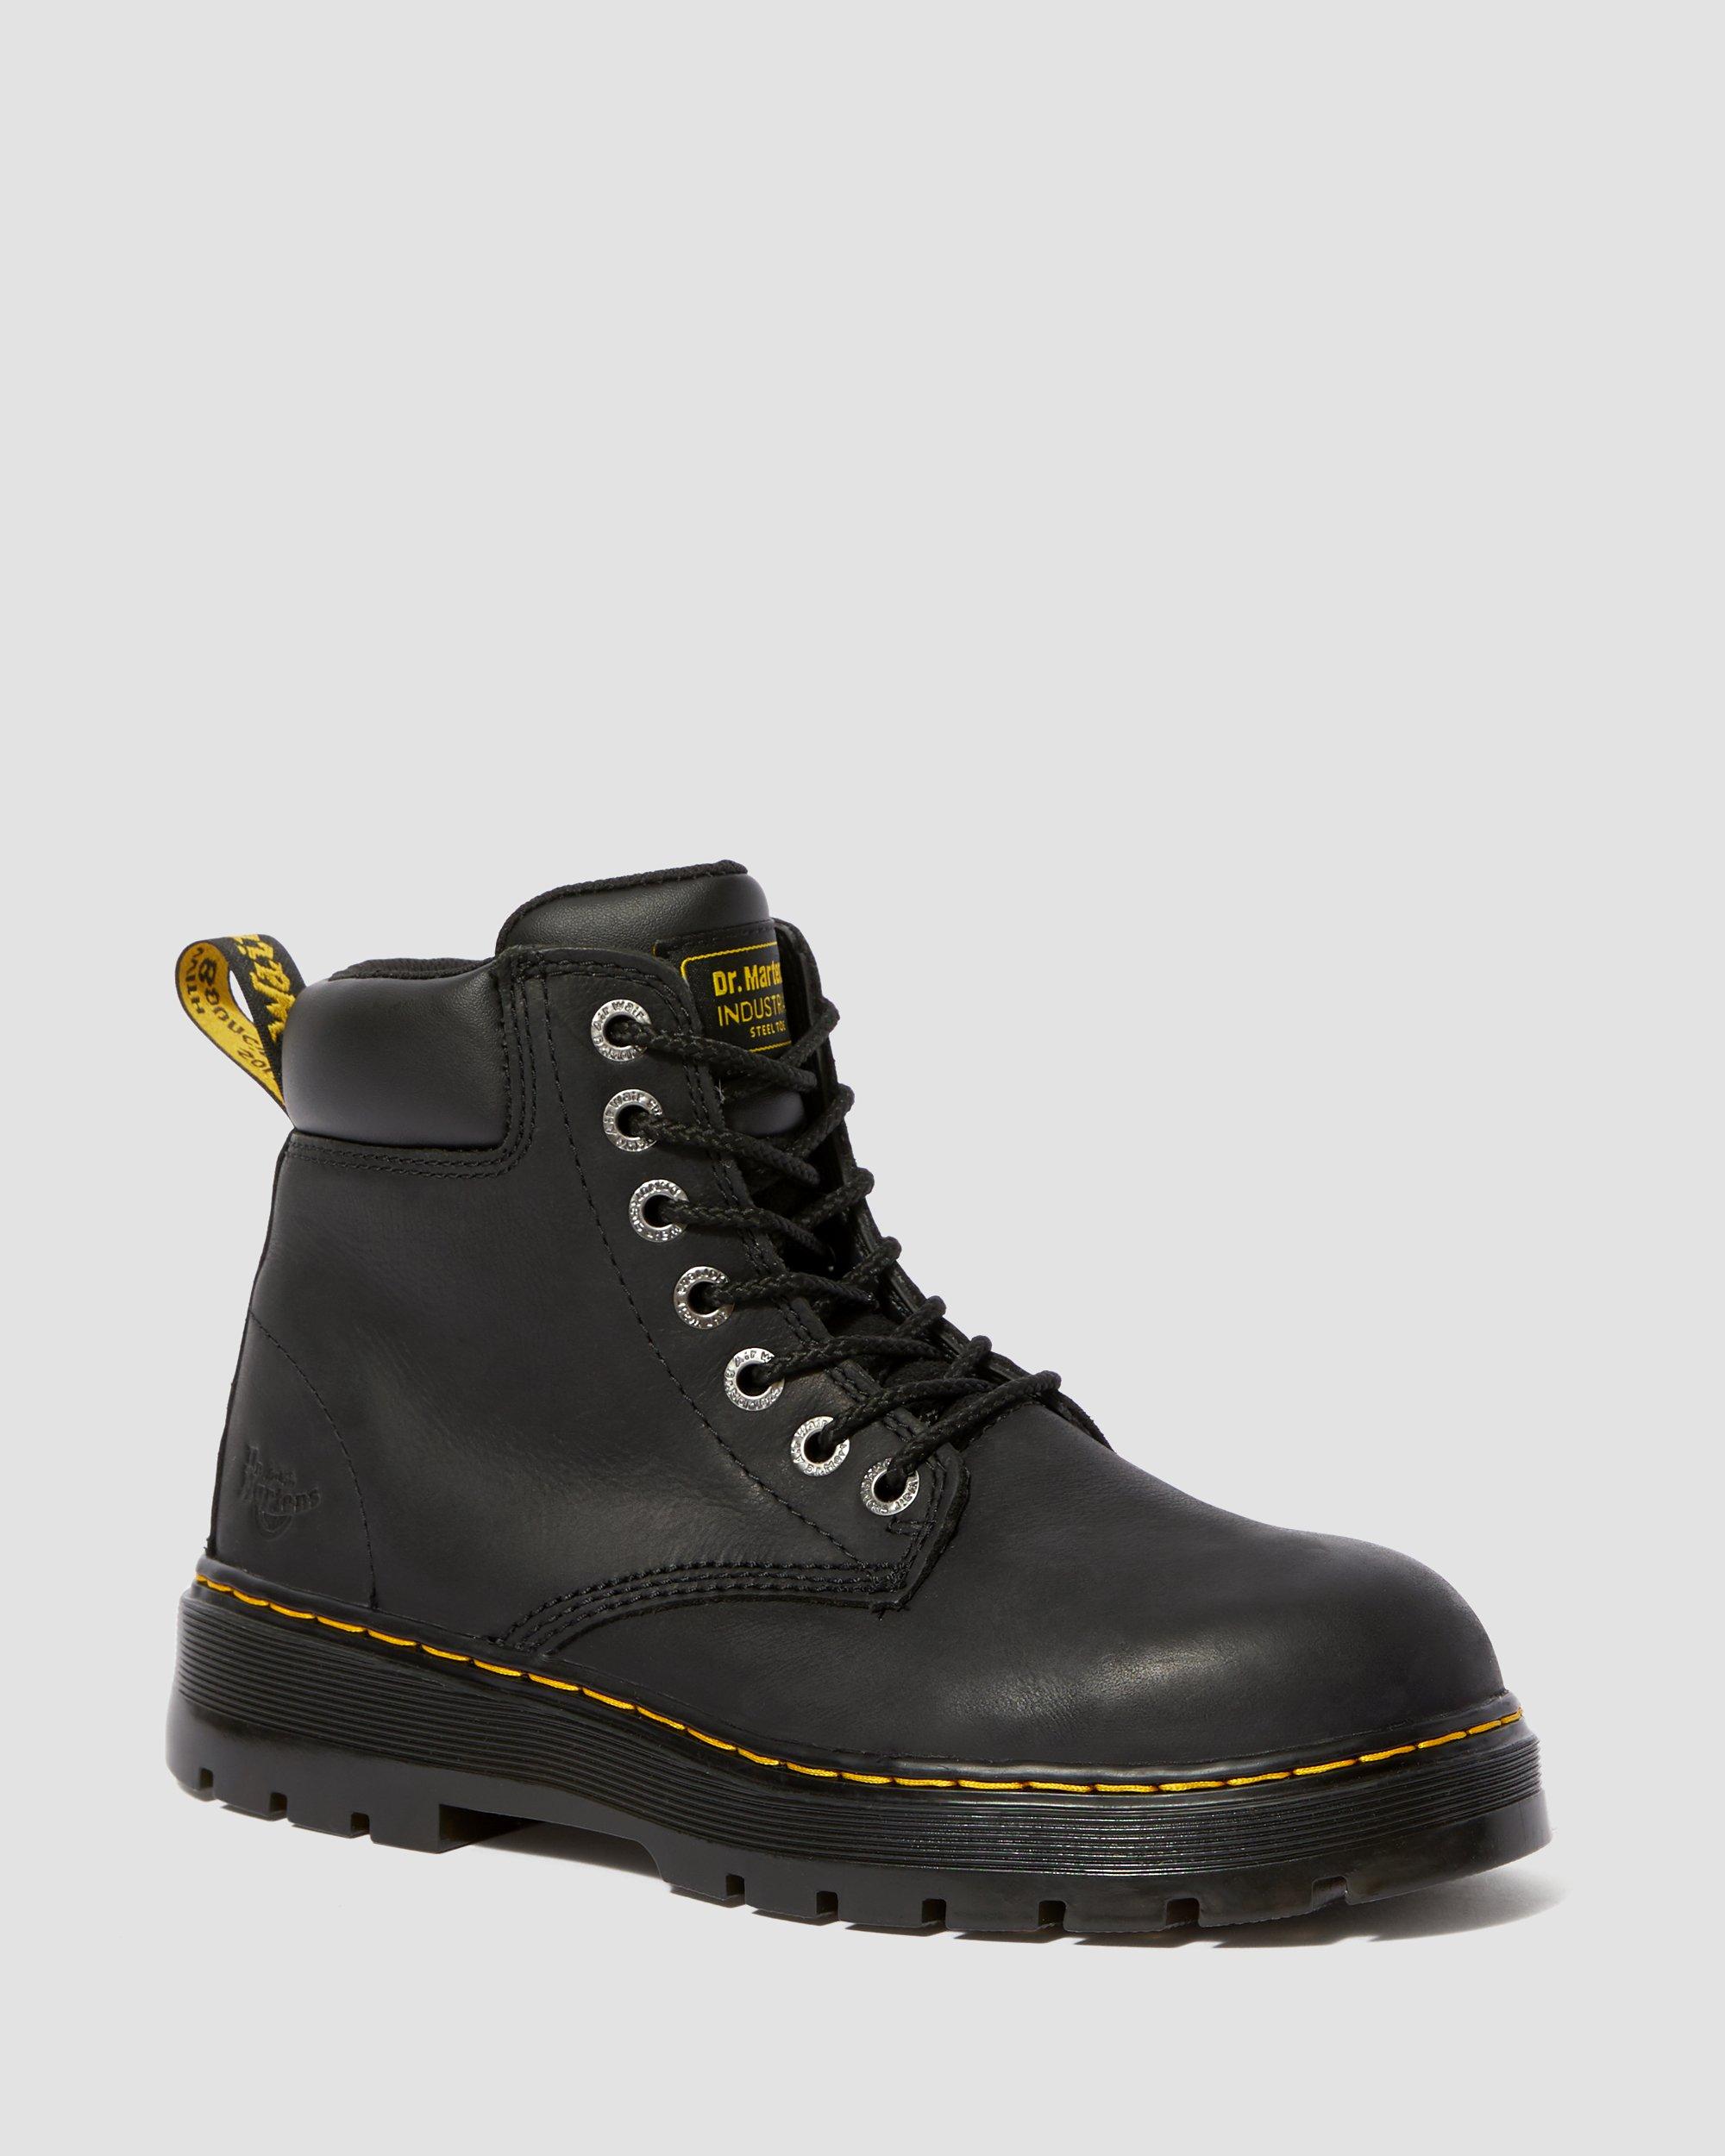 extra wide mens boots uk